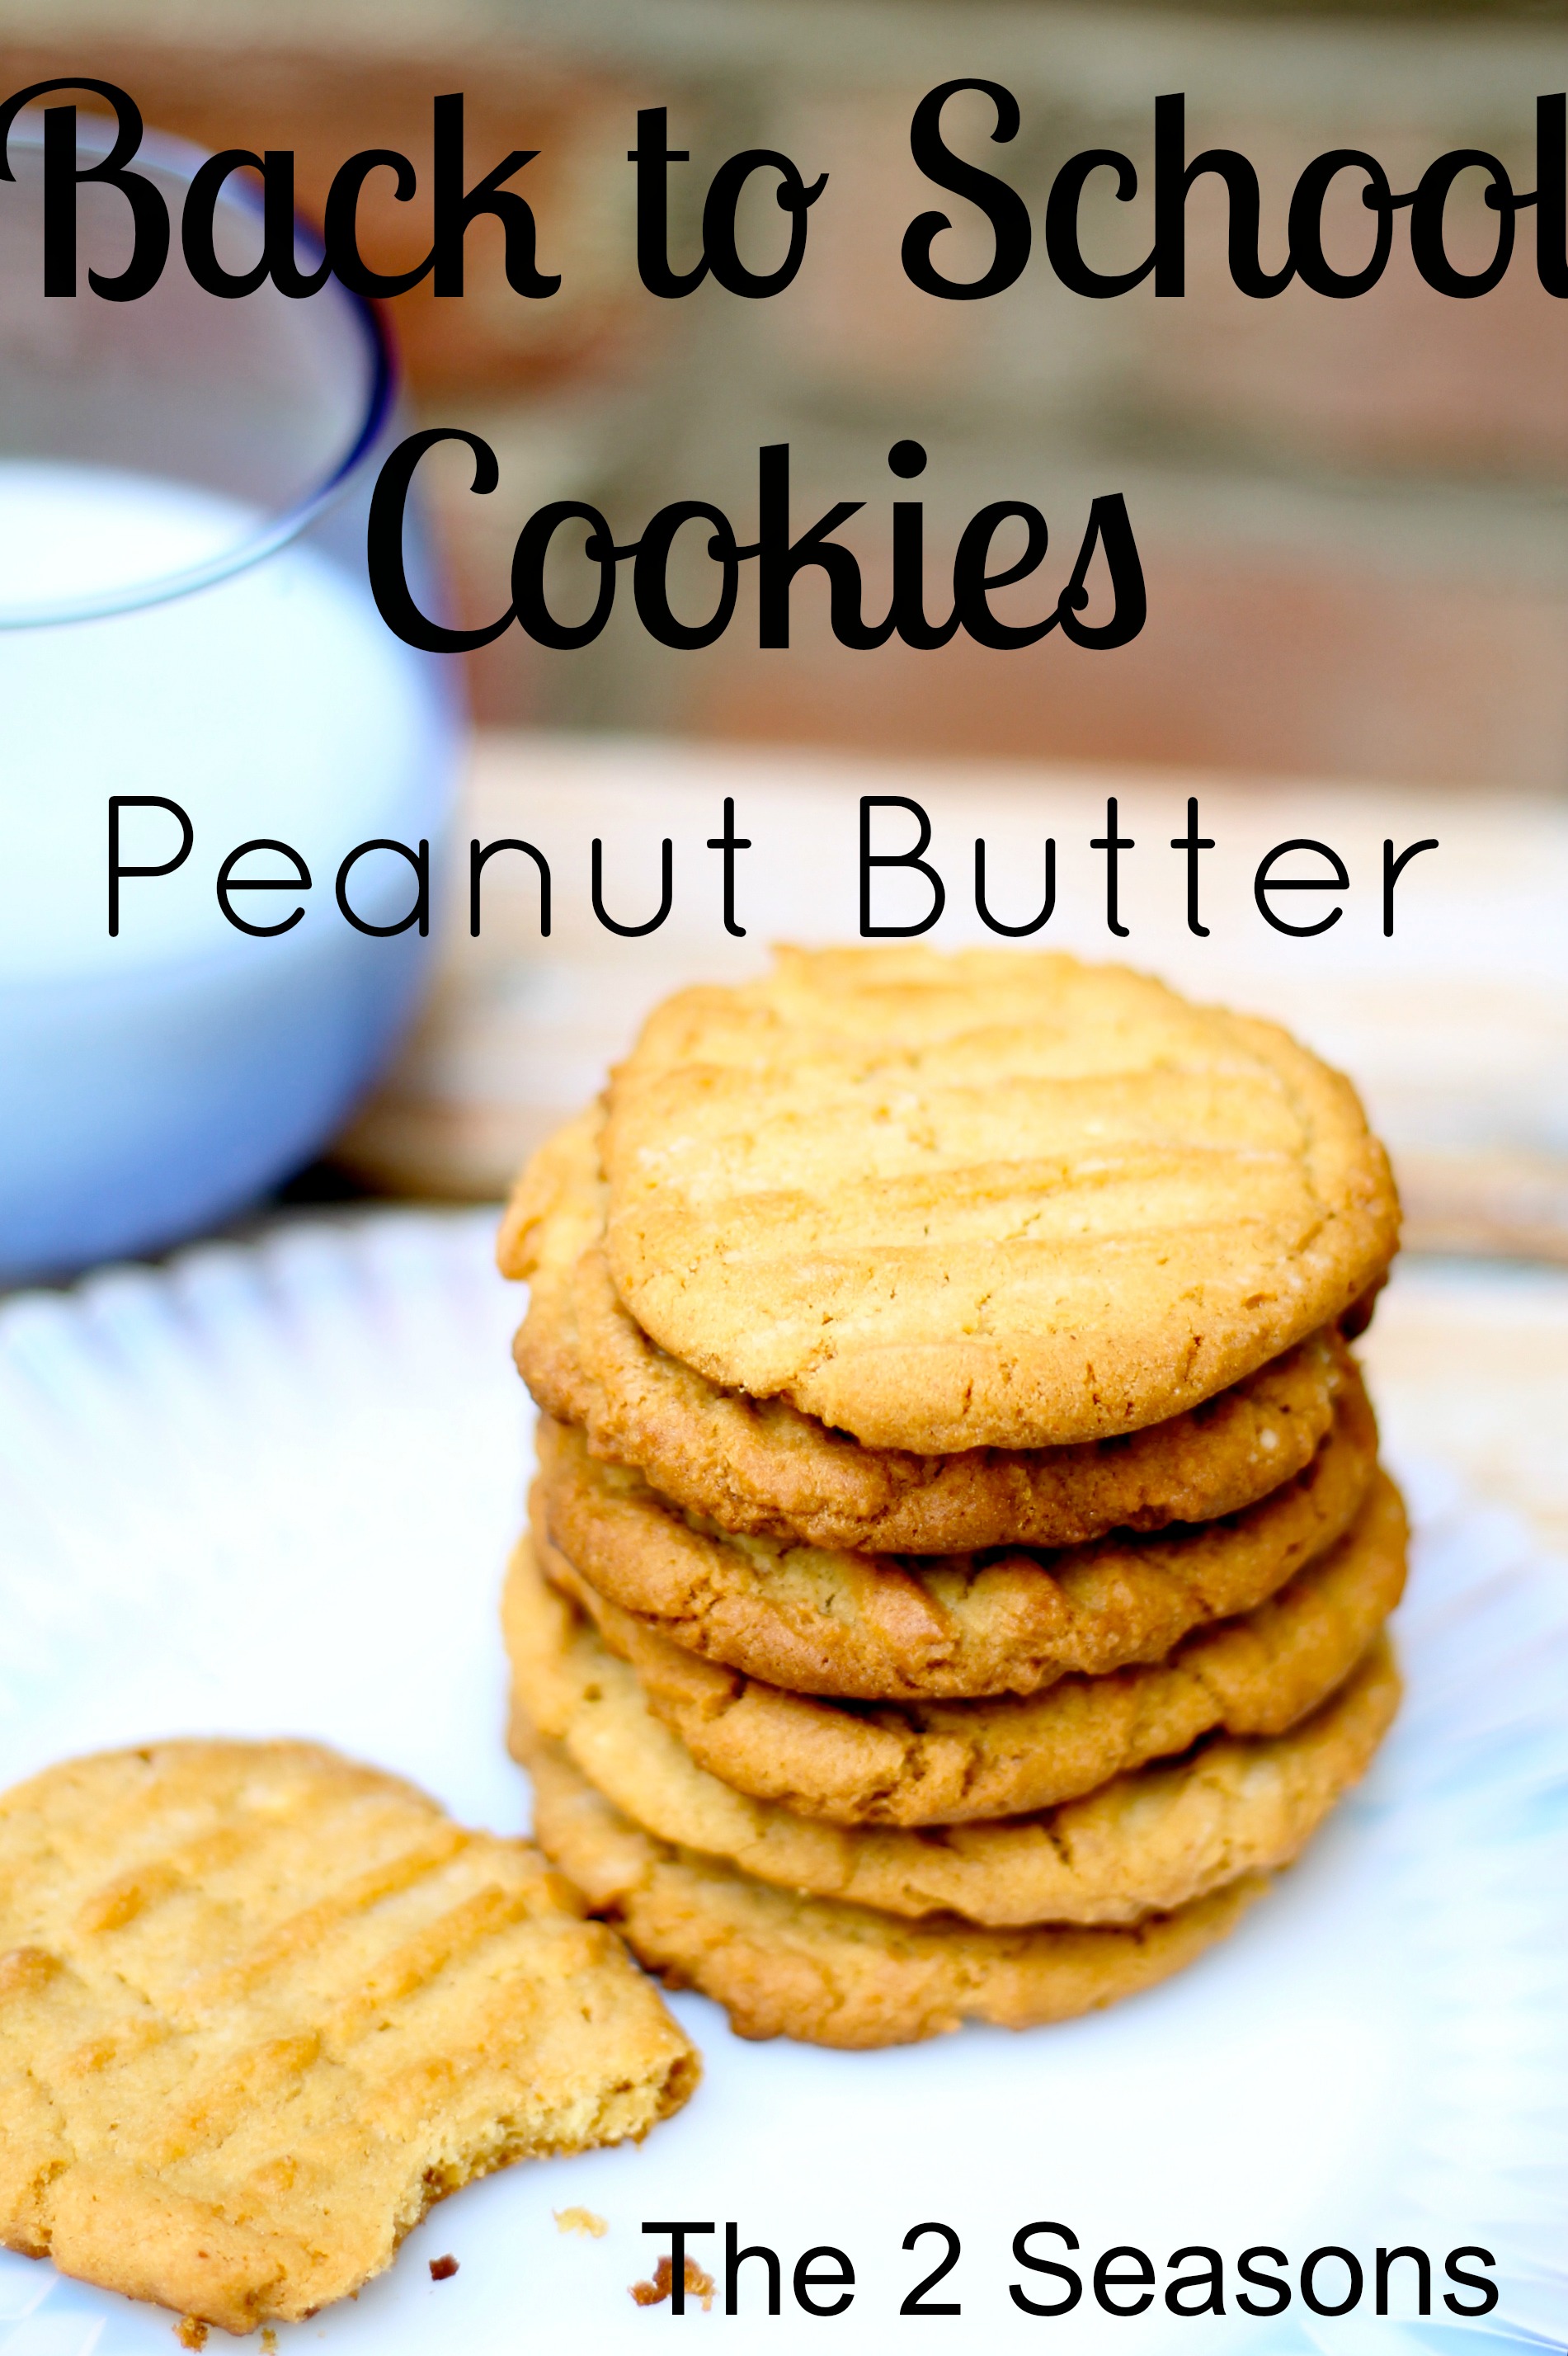 Peanut butter cookies - Peanut Butter Choco Chip Cookies